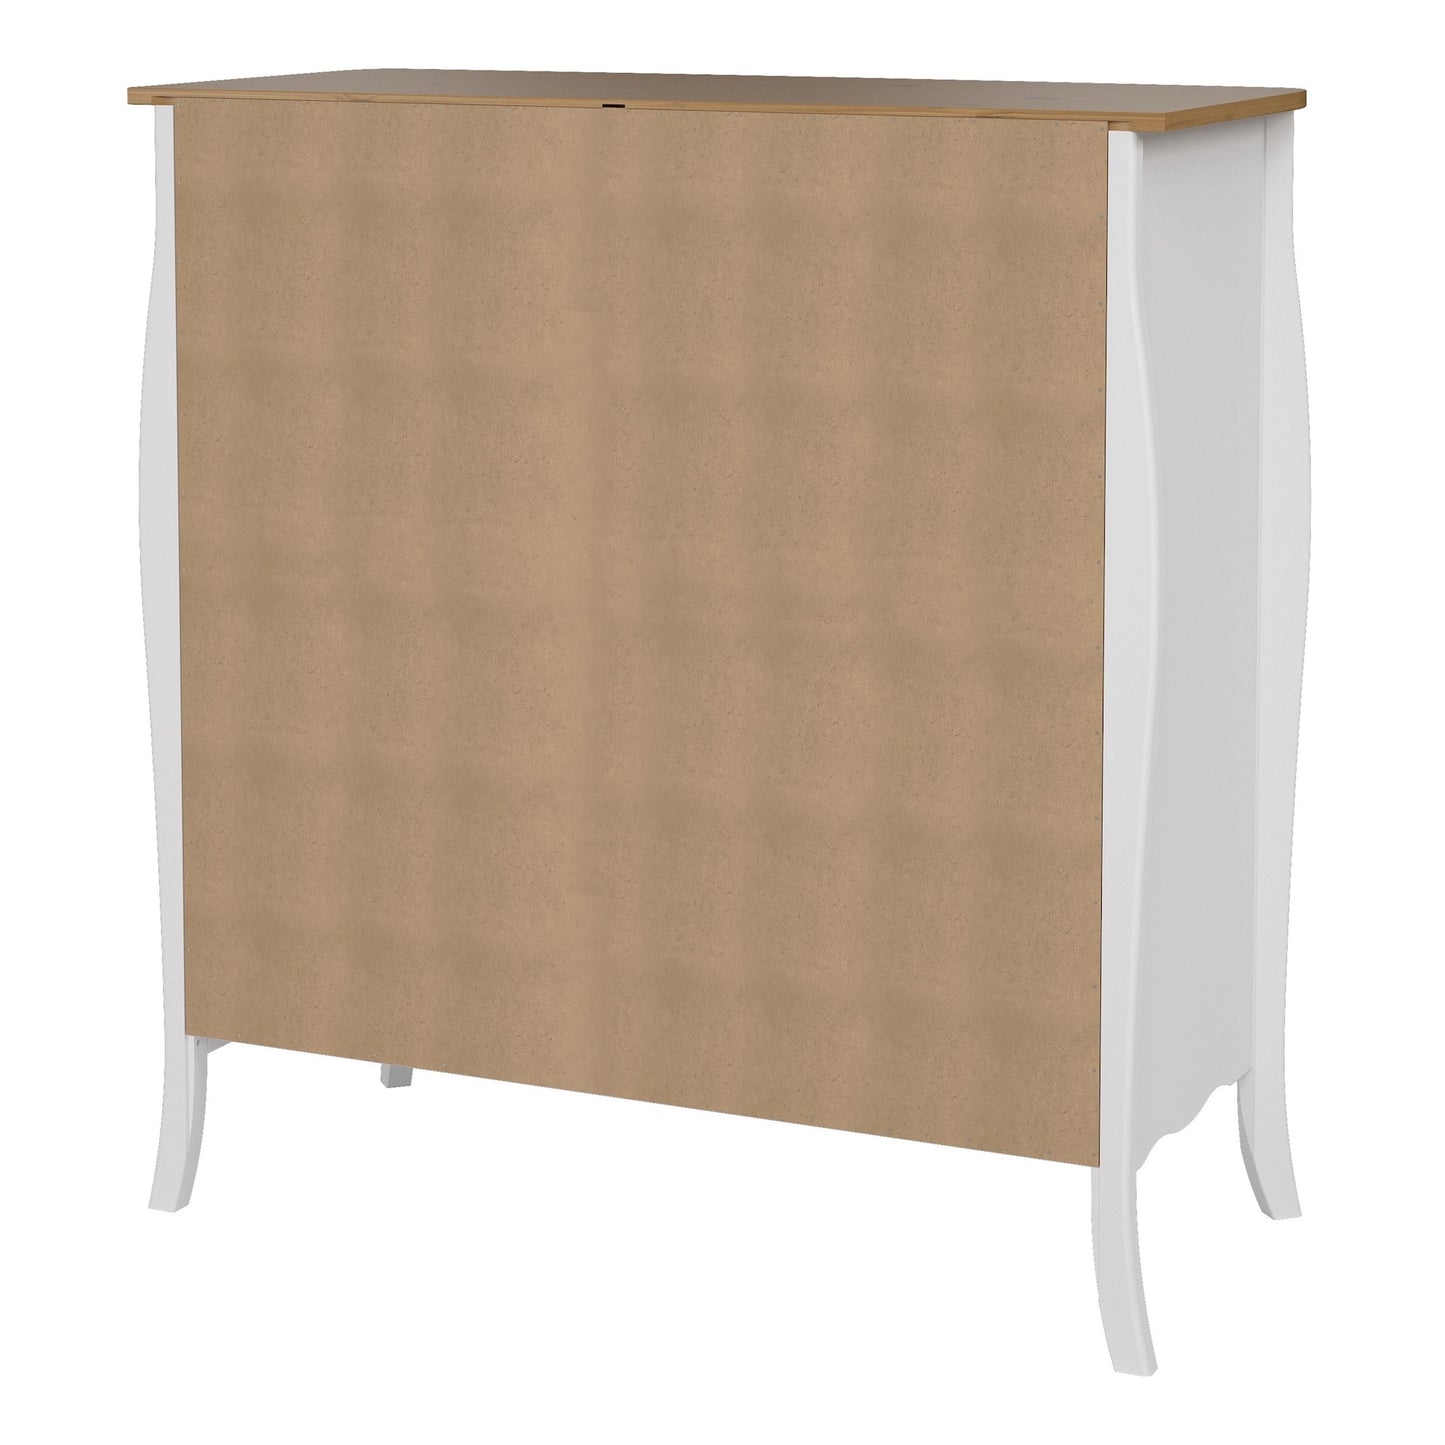 Furniture To Go Baroque Sideboard 2 Doors + 1 Drawer, Pure White Iced Coffee Lacquer